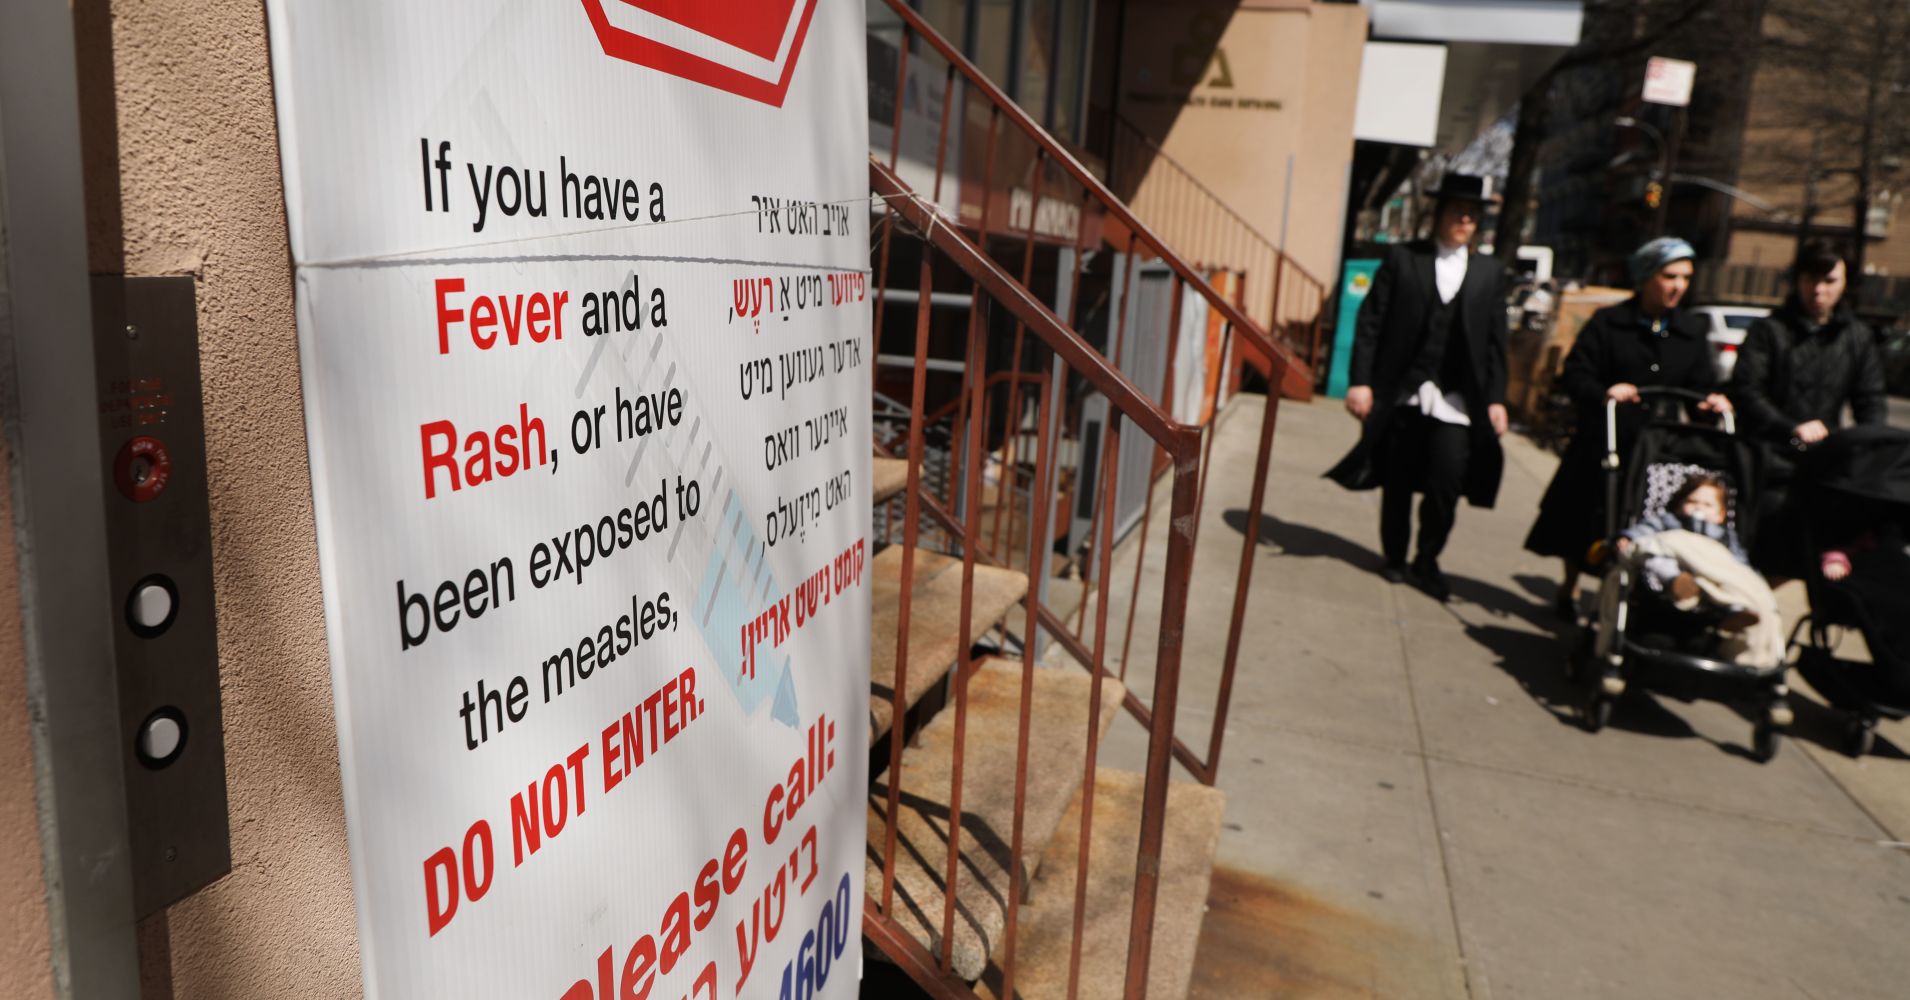 A sign warns people of measles in the ultra-Orthodox Jewish community in Williamsburg on April 10, 2019 in New York City.